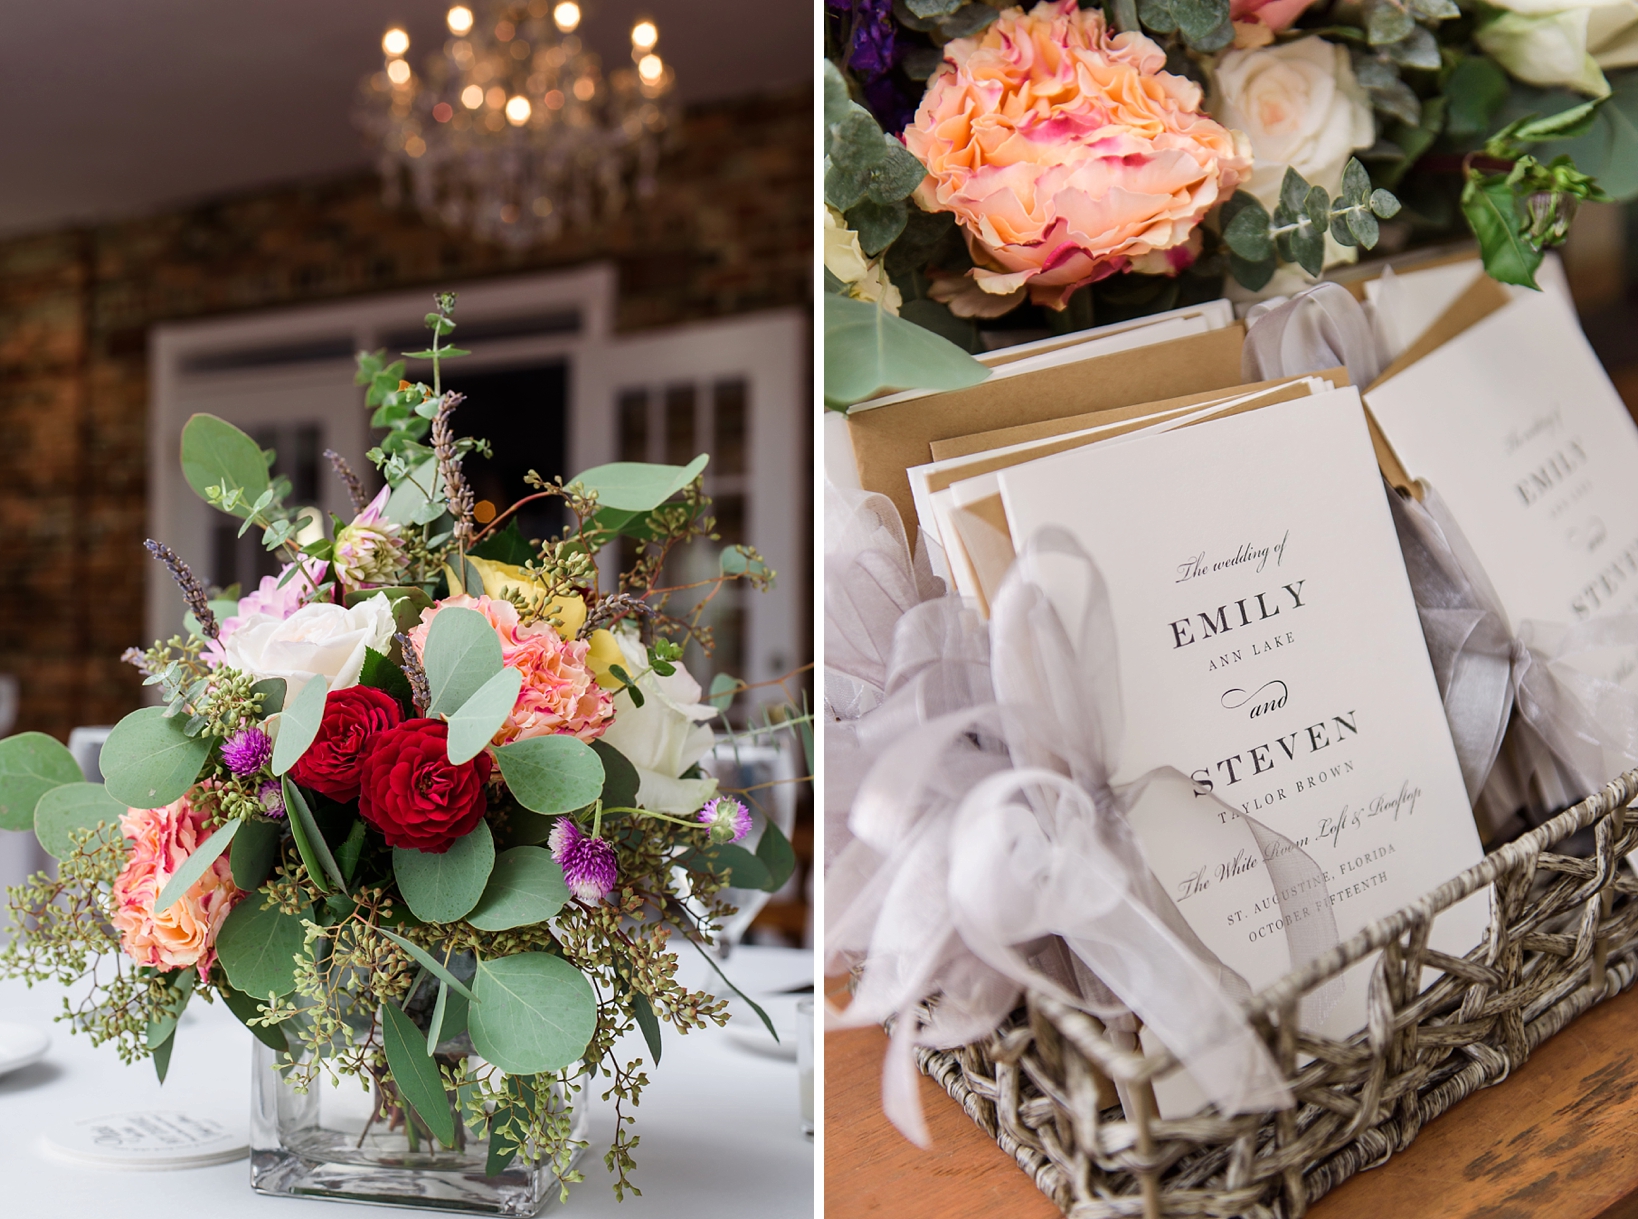 Wedding programs and table centerpieces during the wedding reception